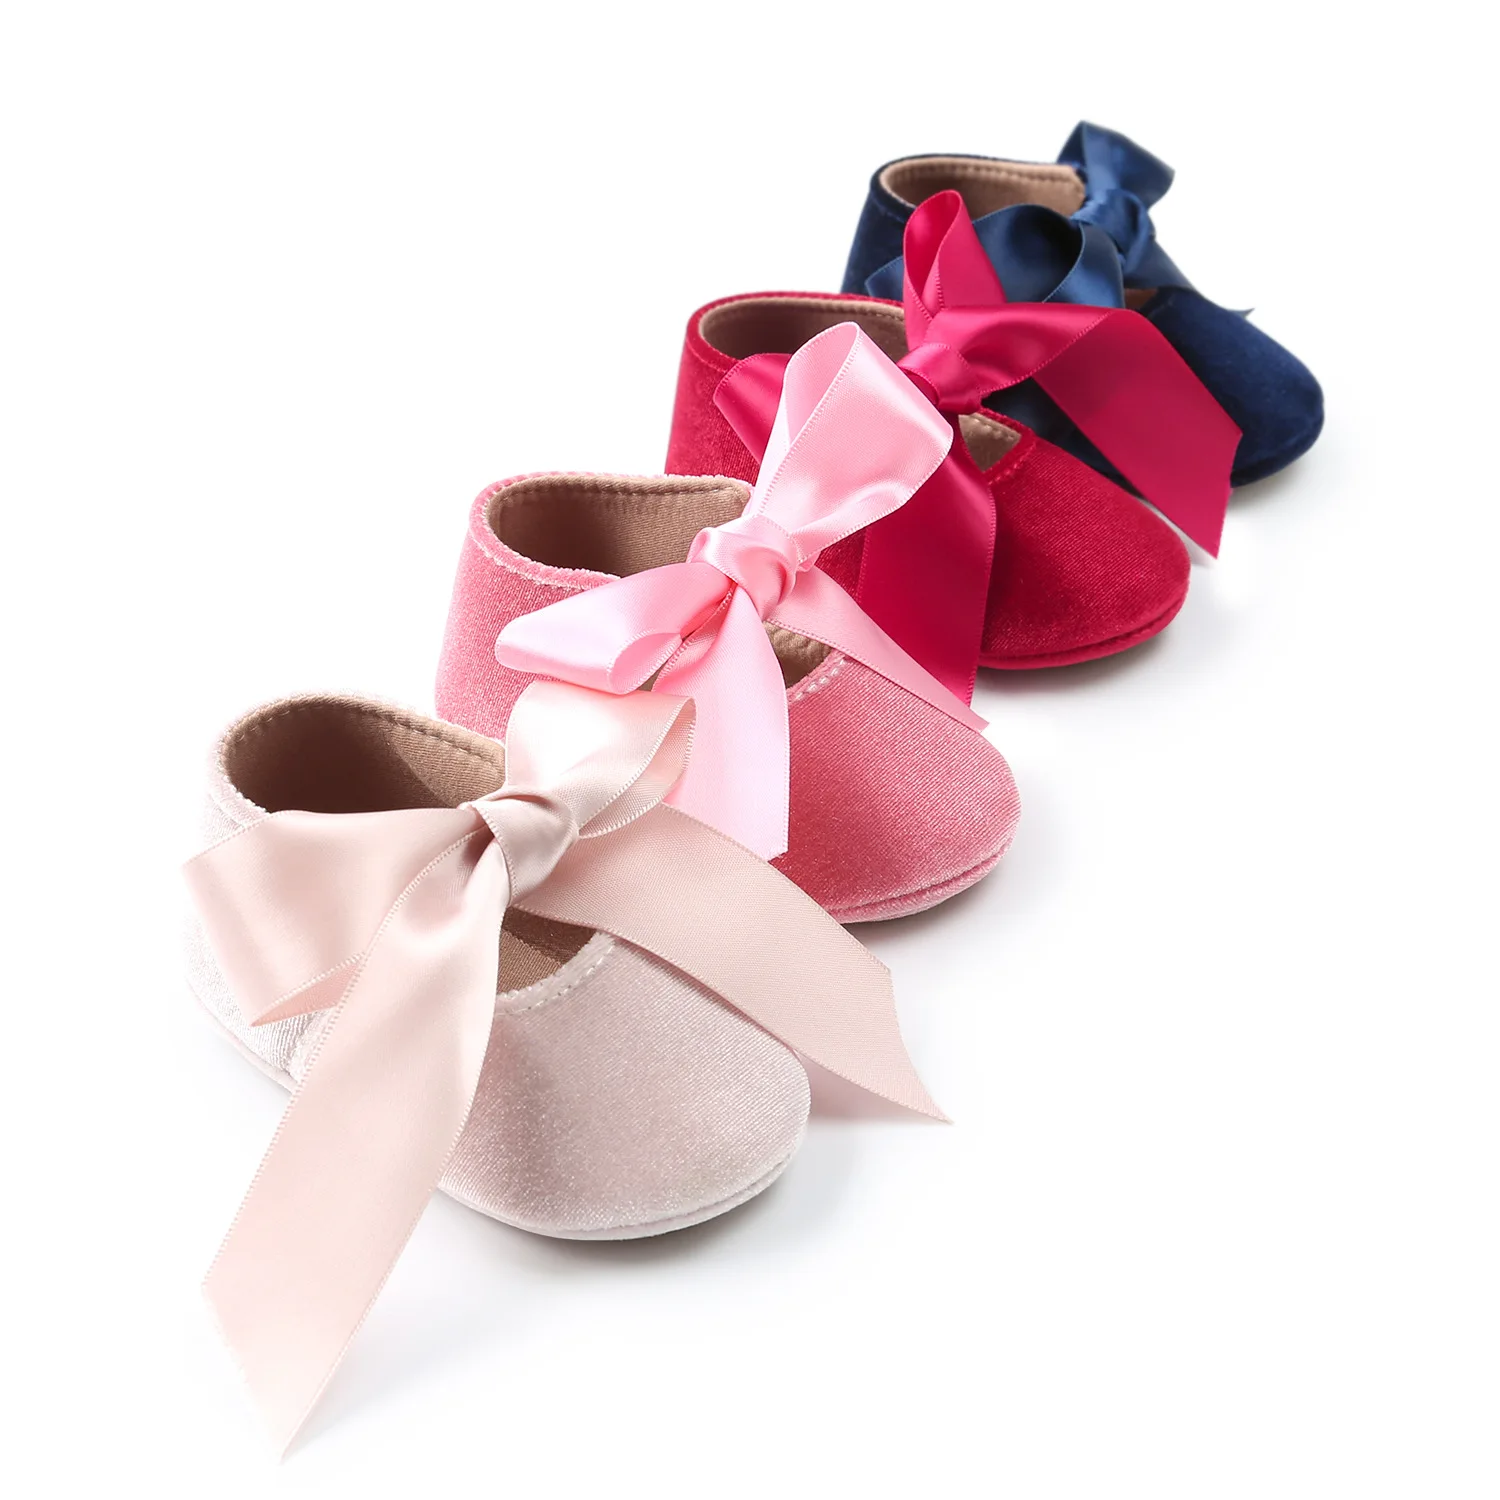 

Fashion Baby Shoes Cute Ribbon Bowknot Newborn Girls Princess Party Shoes Infant First Walkers 0-18M Moccasins, As pic